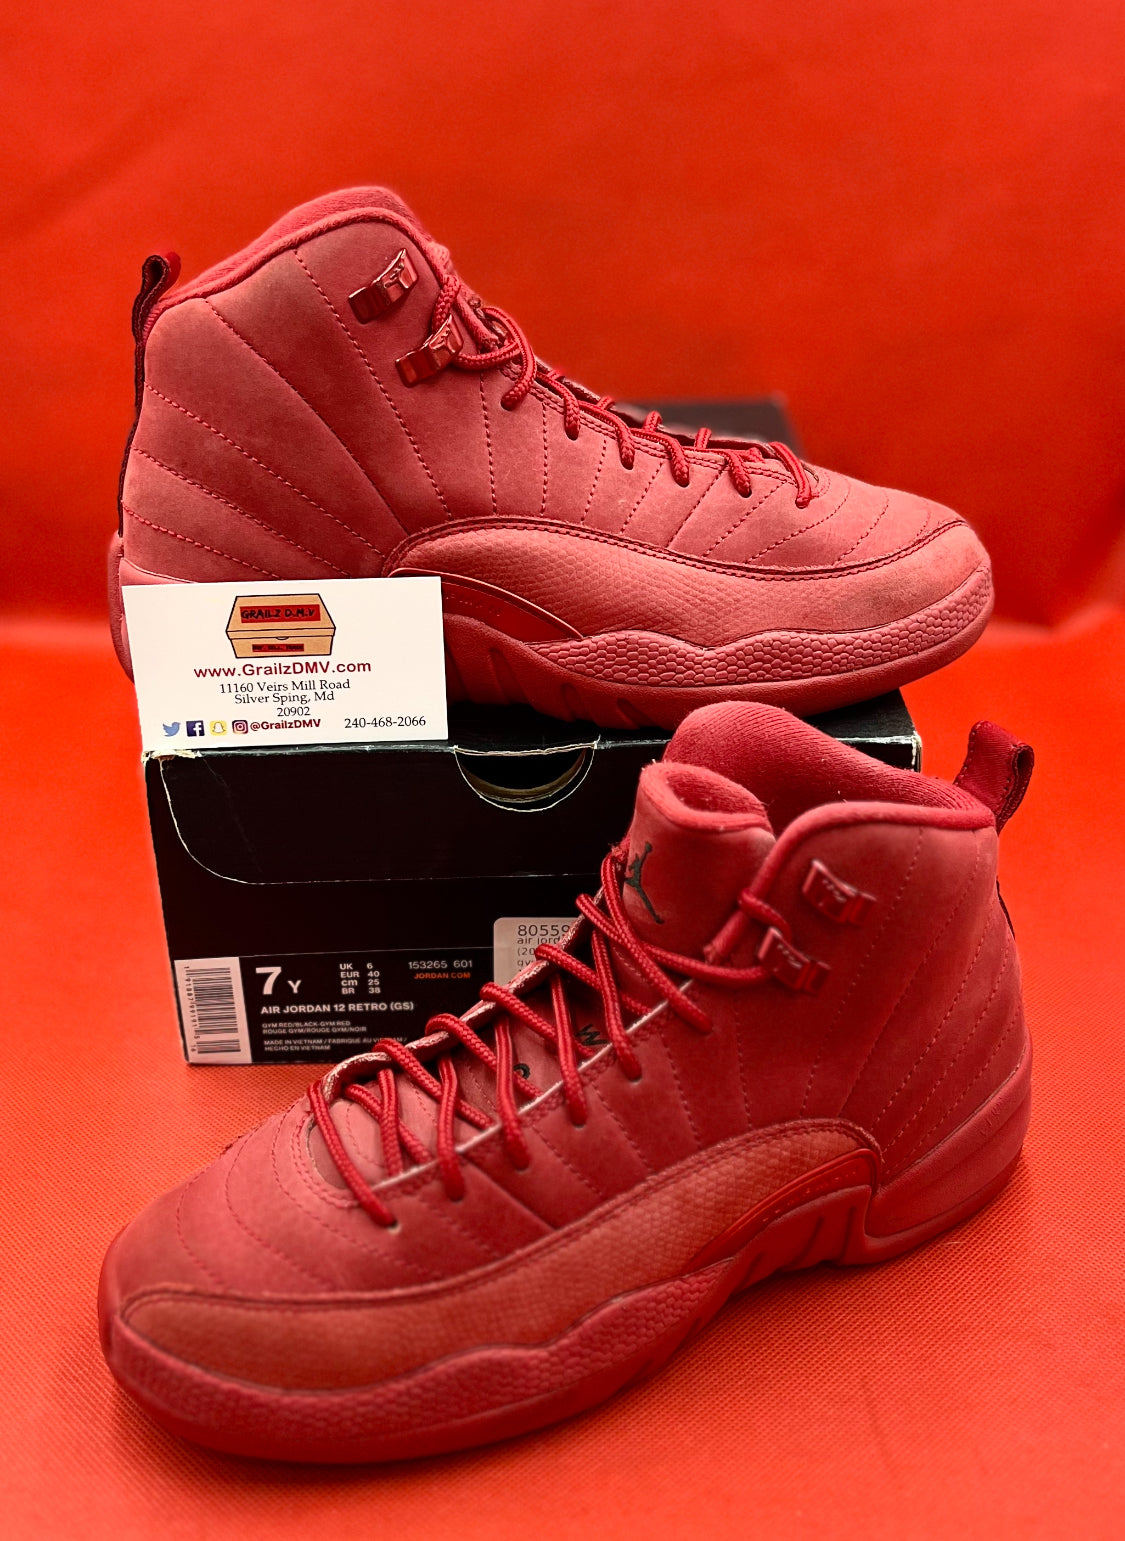 Gym Red 12 Size 7y